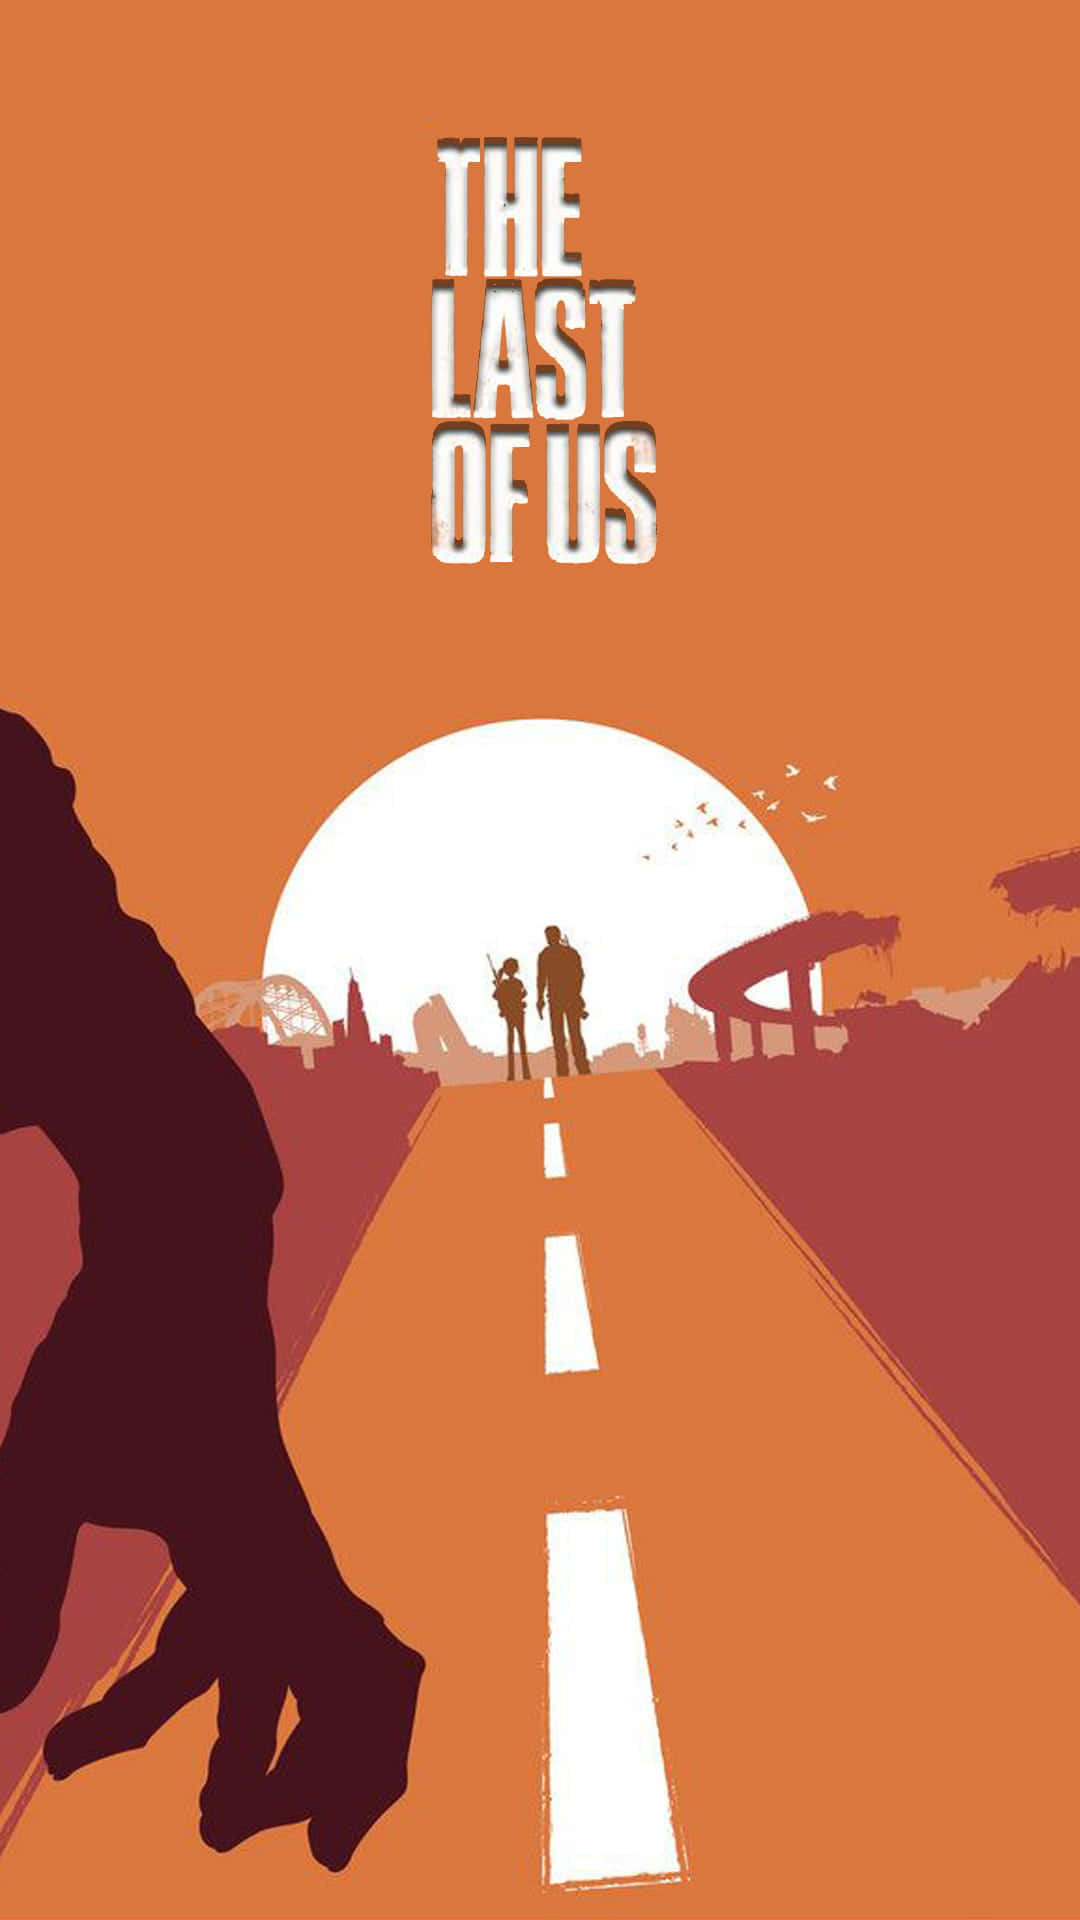 Joel and Ellie exploring a post-apocalyptic world in The Last of Us